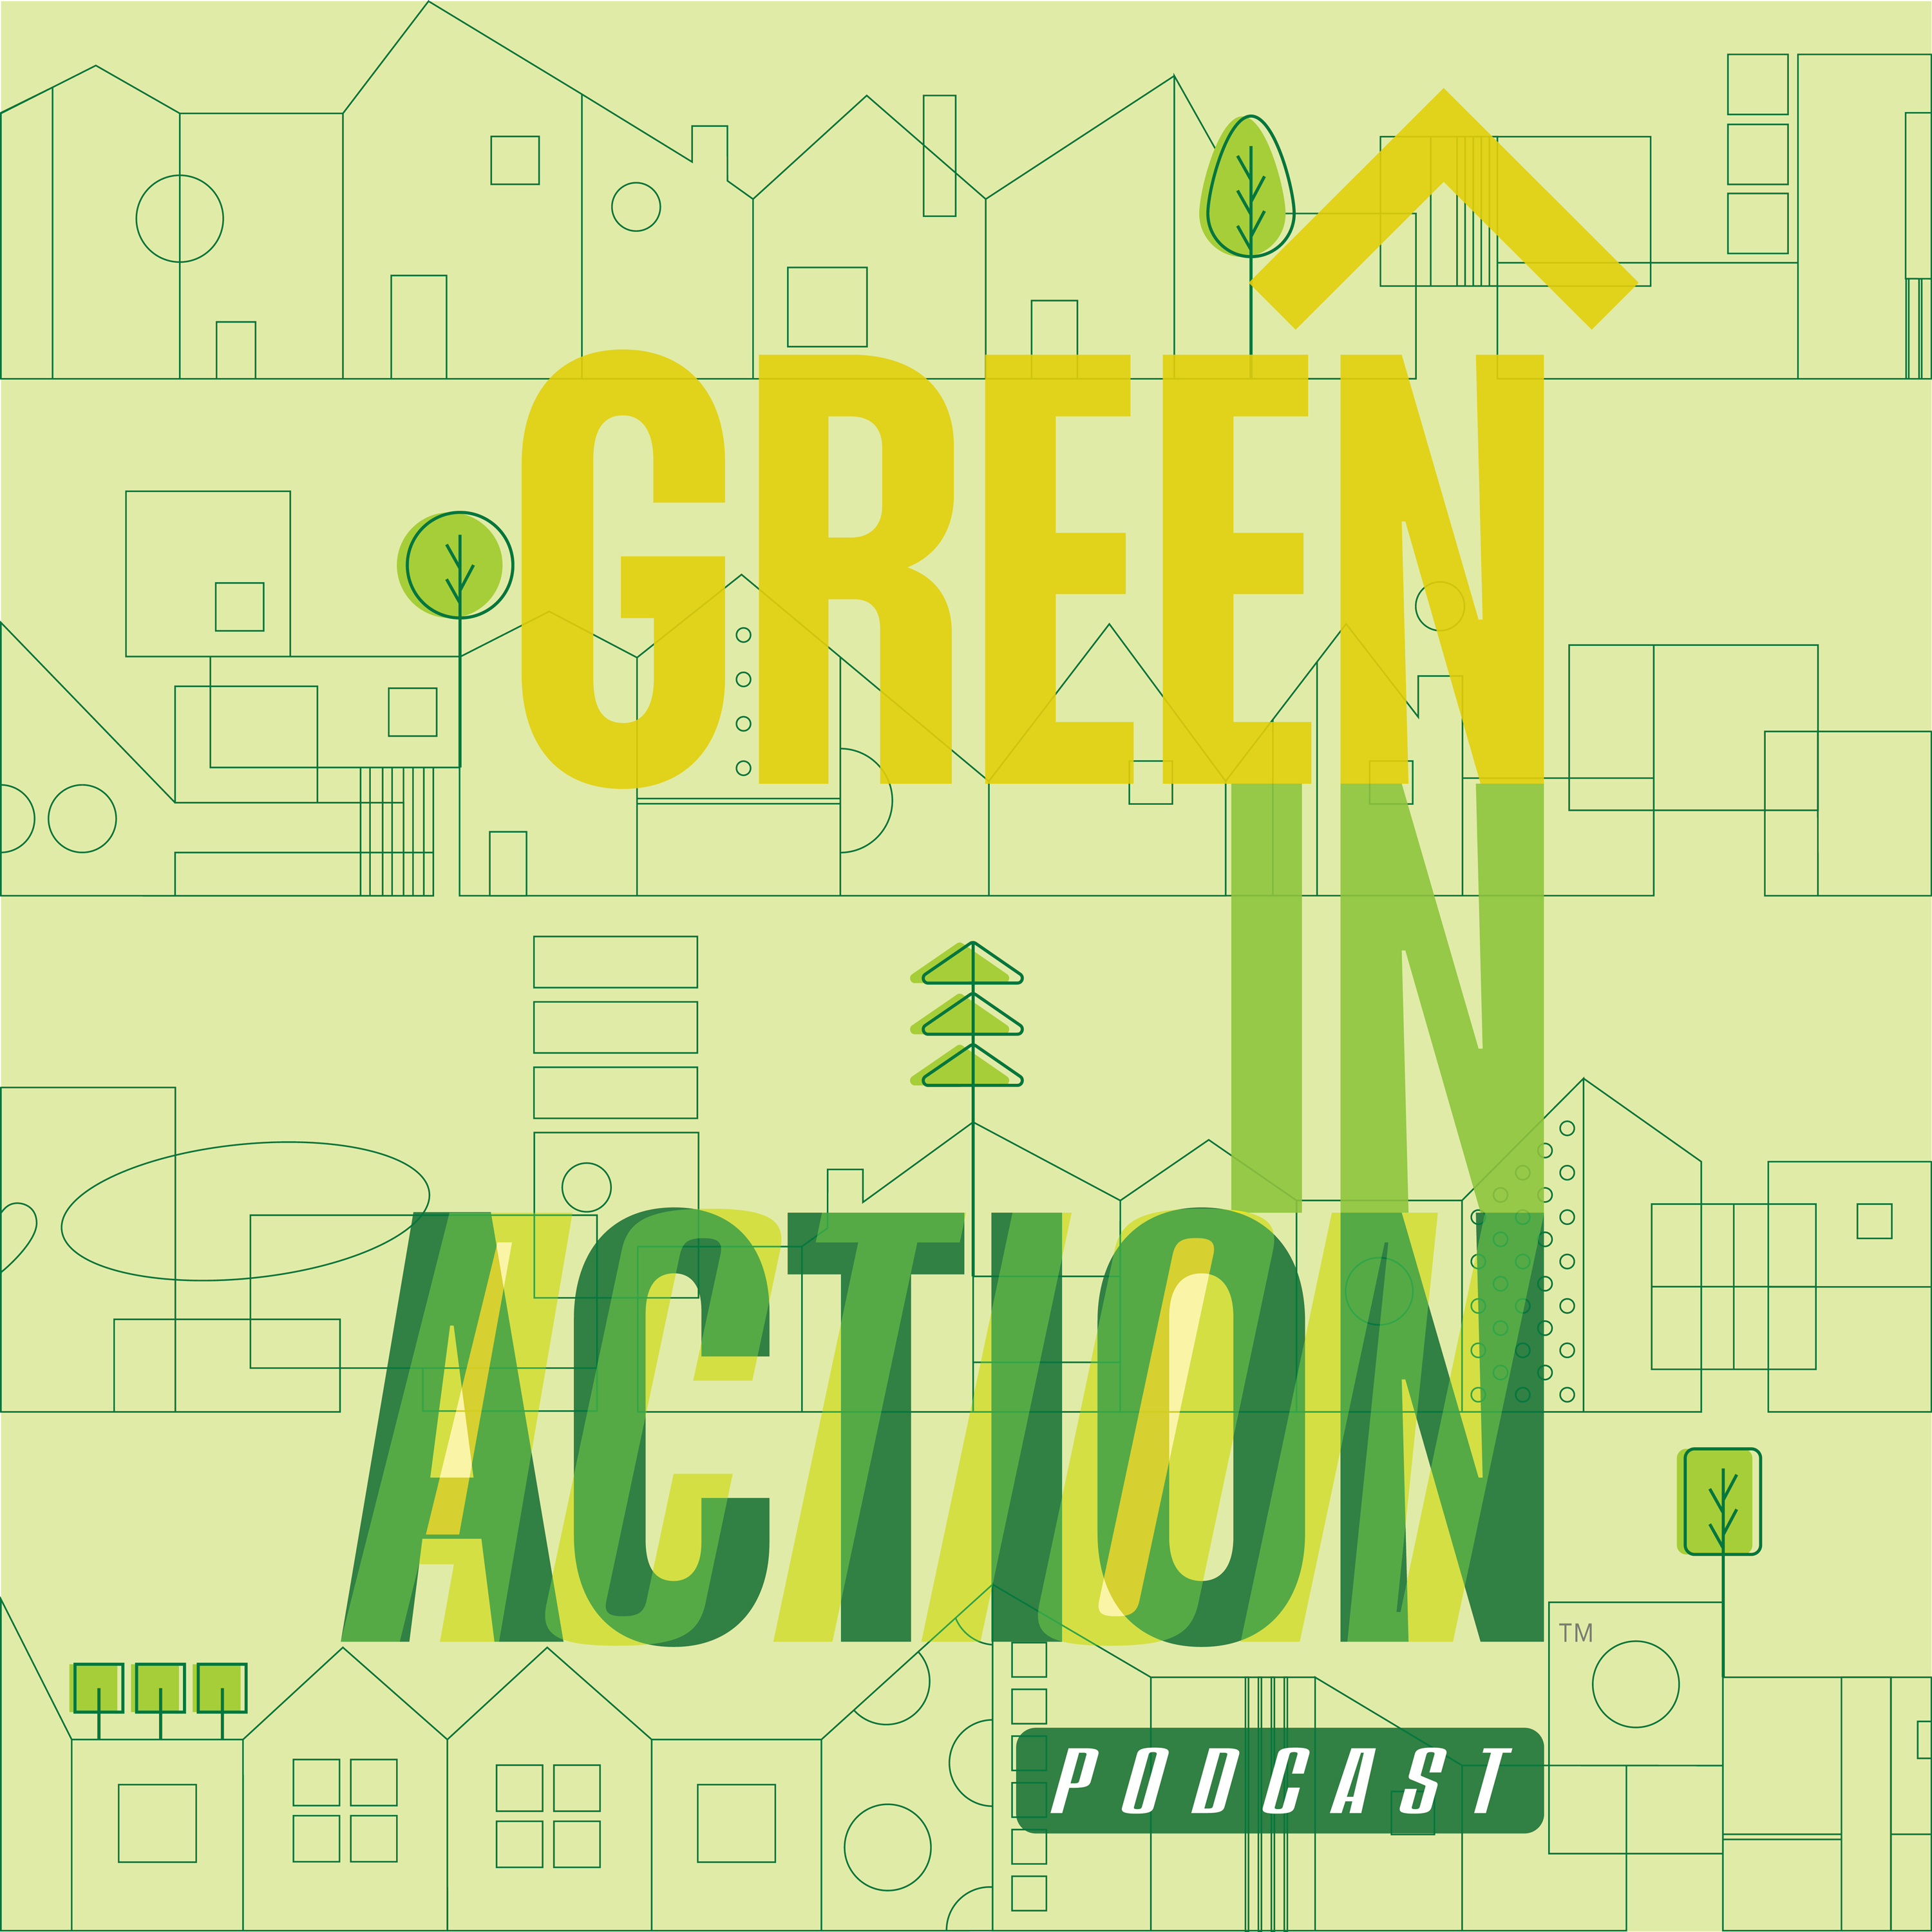 Moving Beyond Green Buildings with Dana Bourland